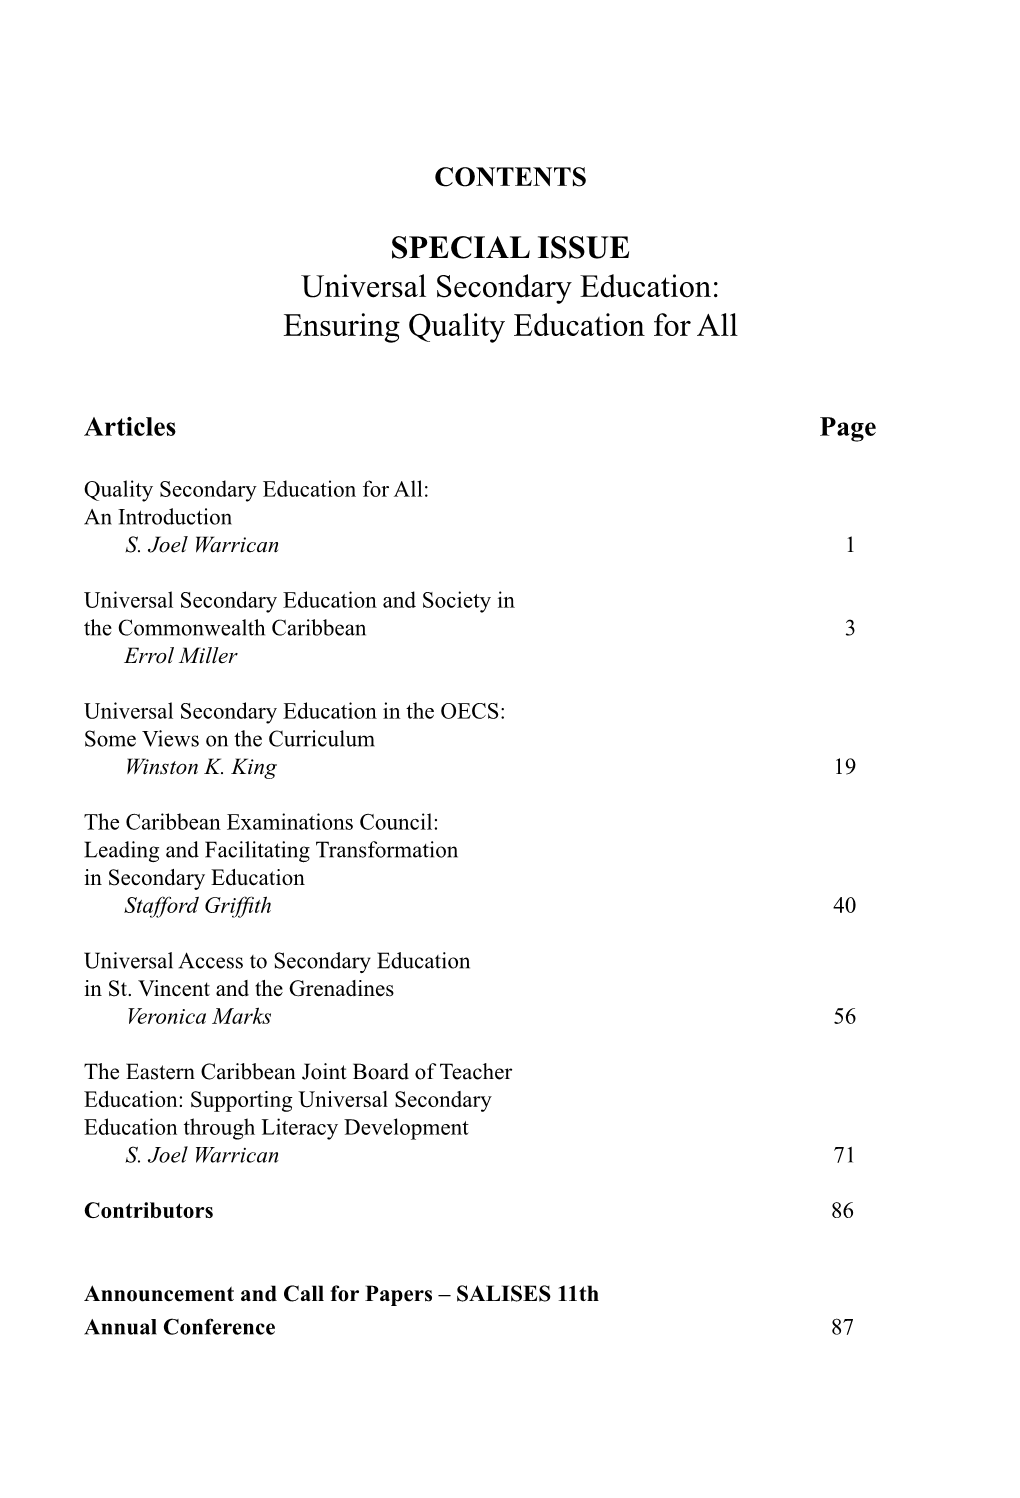 SPECIAL ISSUE Universal Secondary Education: Ensuring Quality Education for All